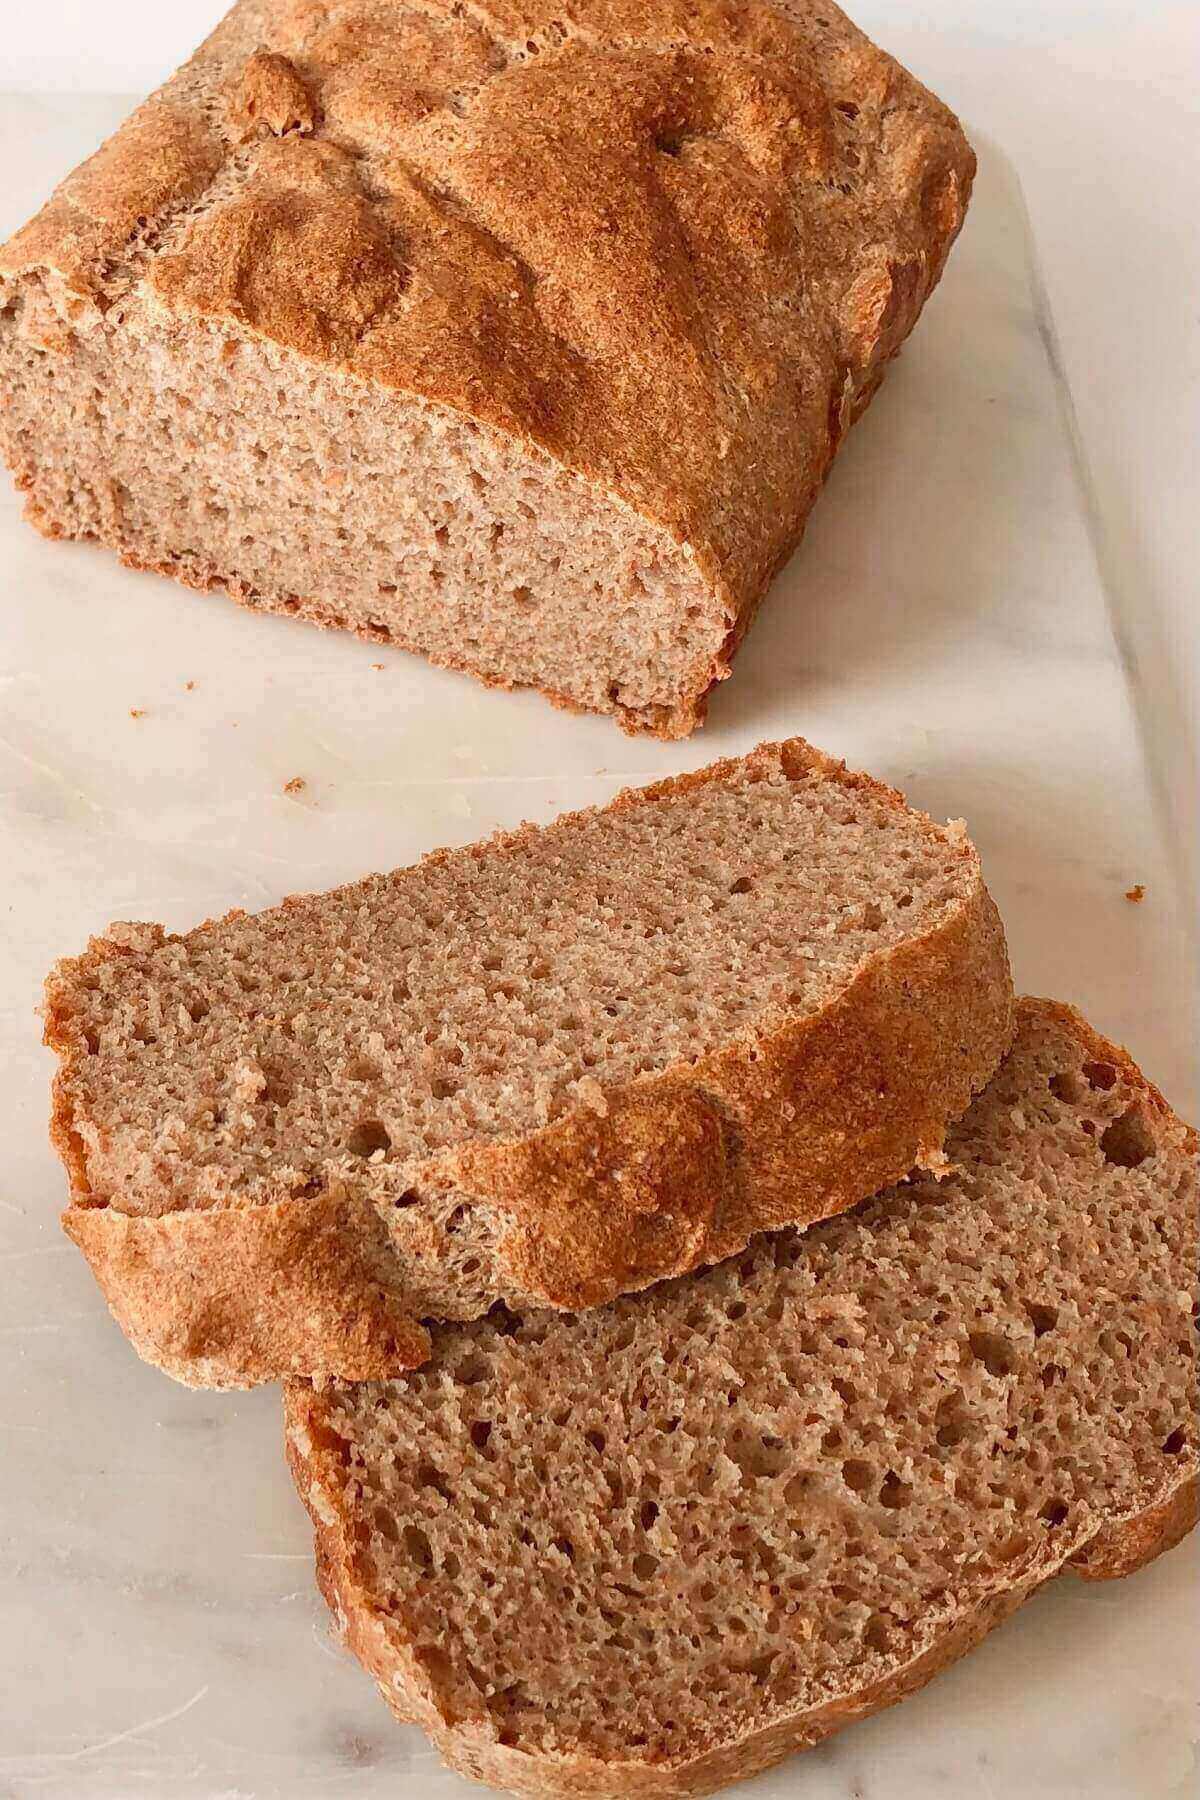 A loaf of homemade whole wheat bread with two slices cut.